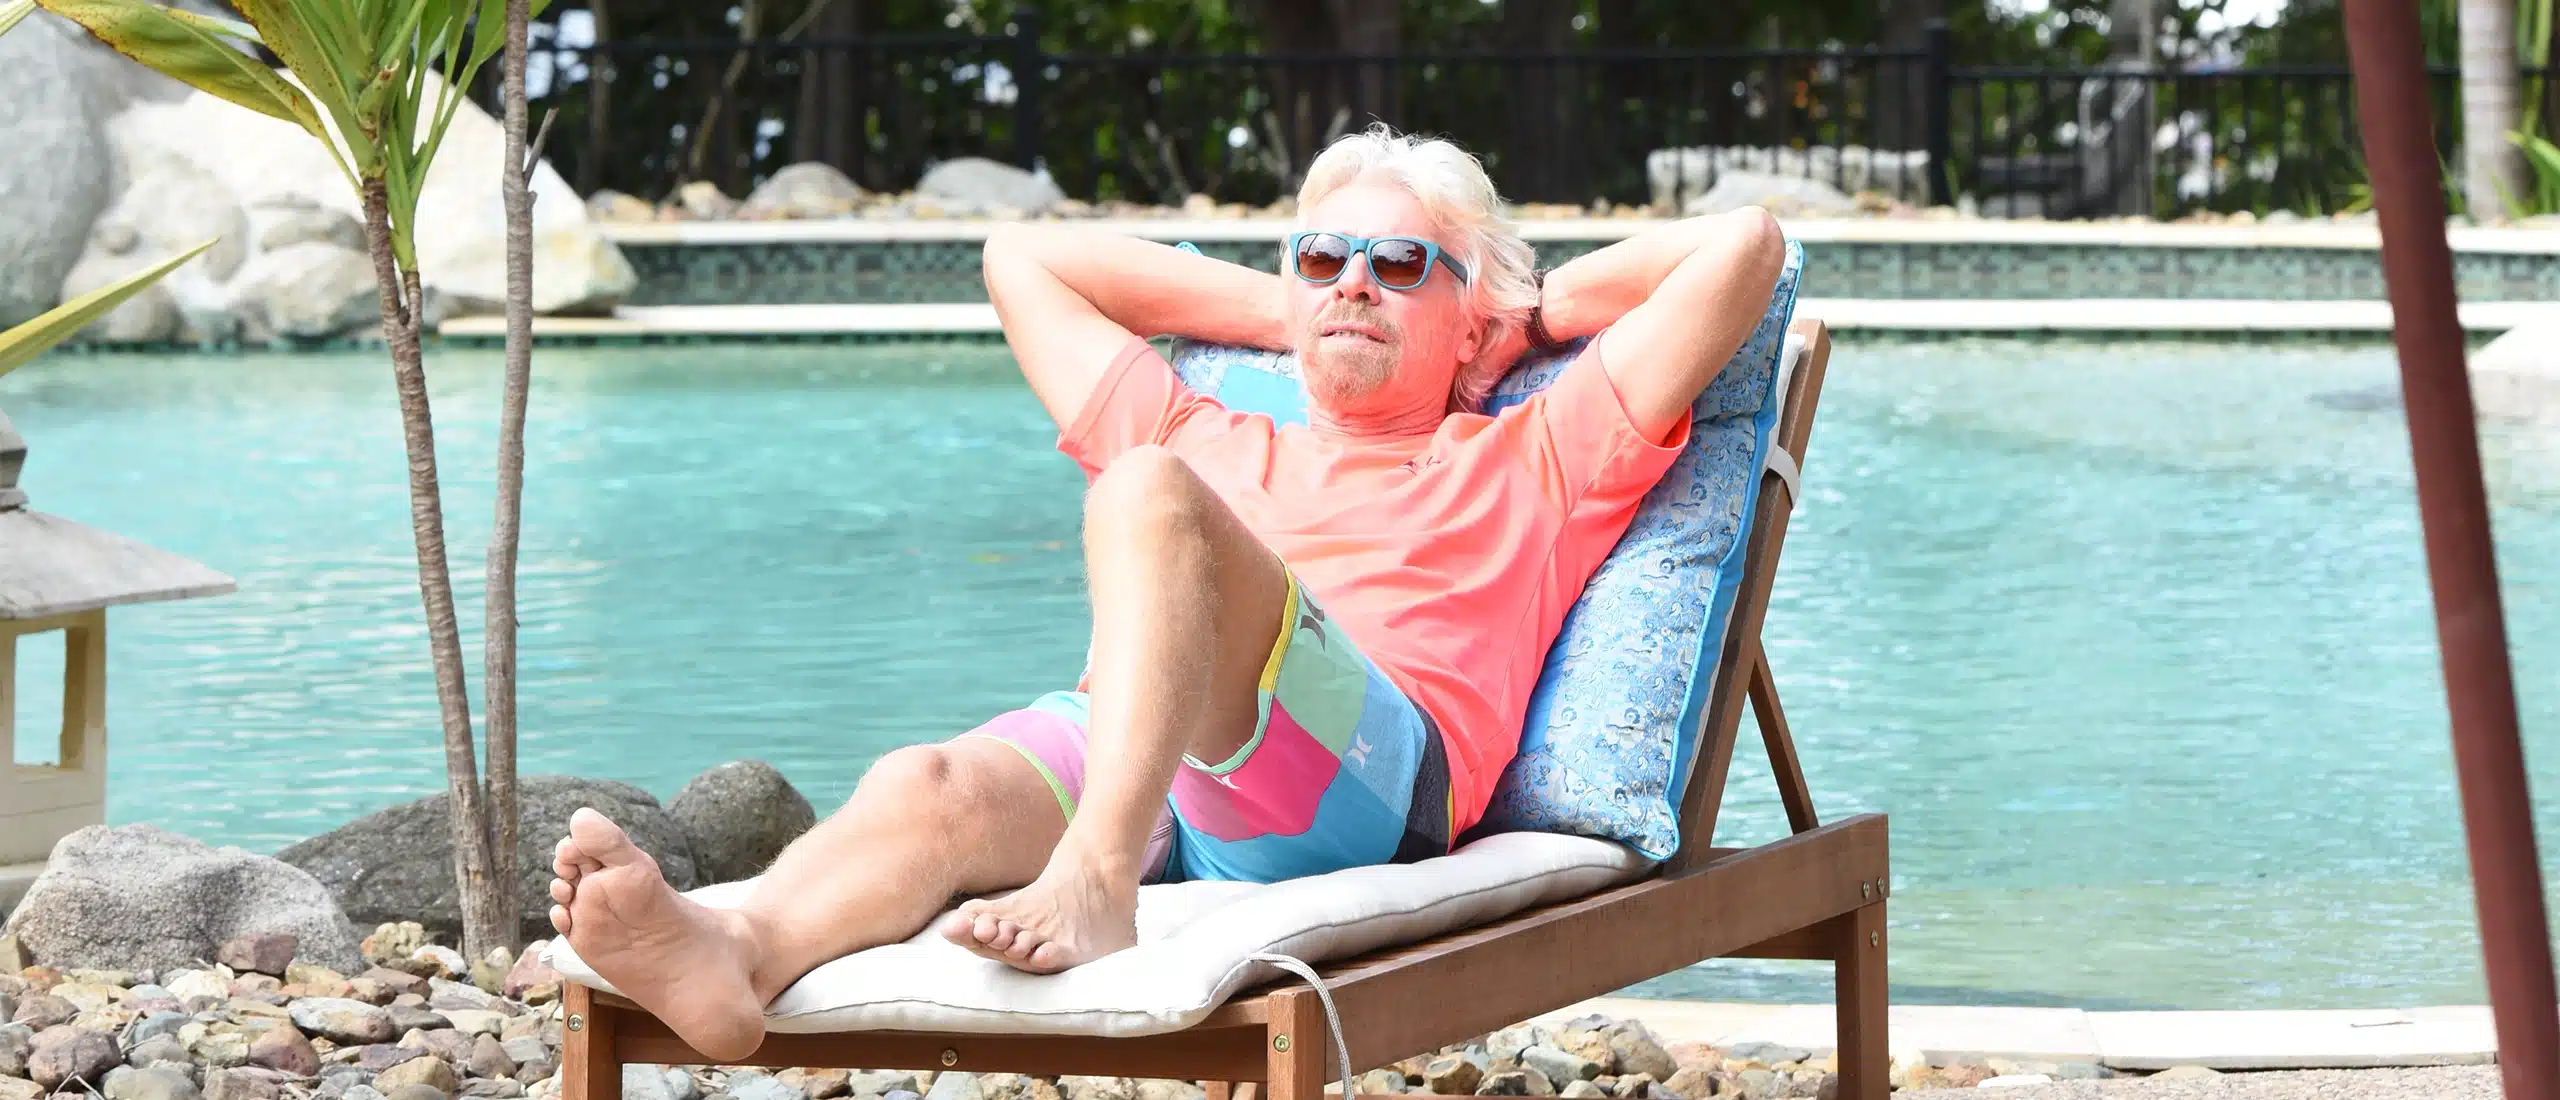 Richard Branson relaxing by the pool